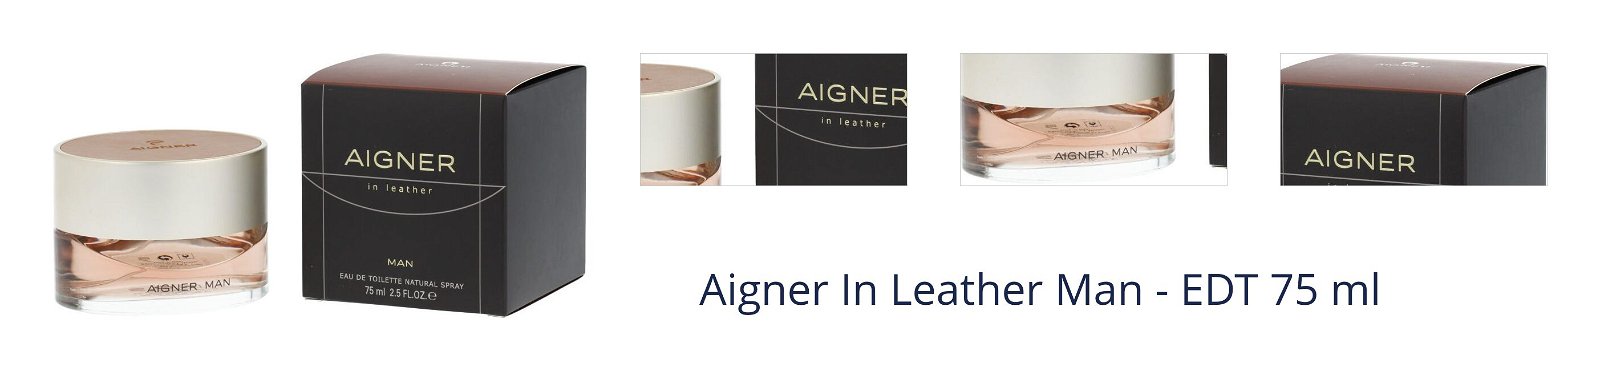 Aigner In Leather Man - EDT 75 ml 1